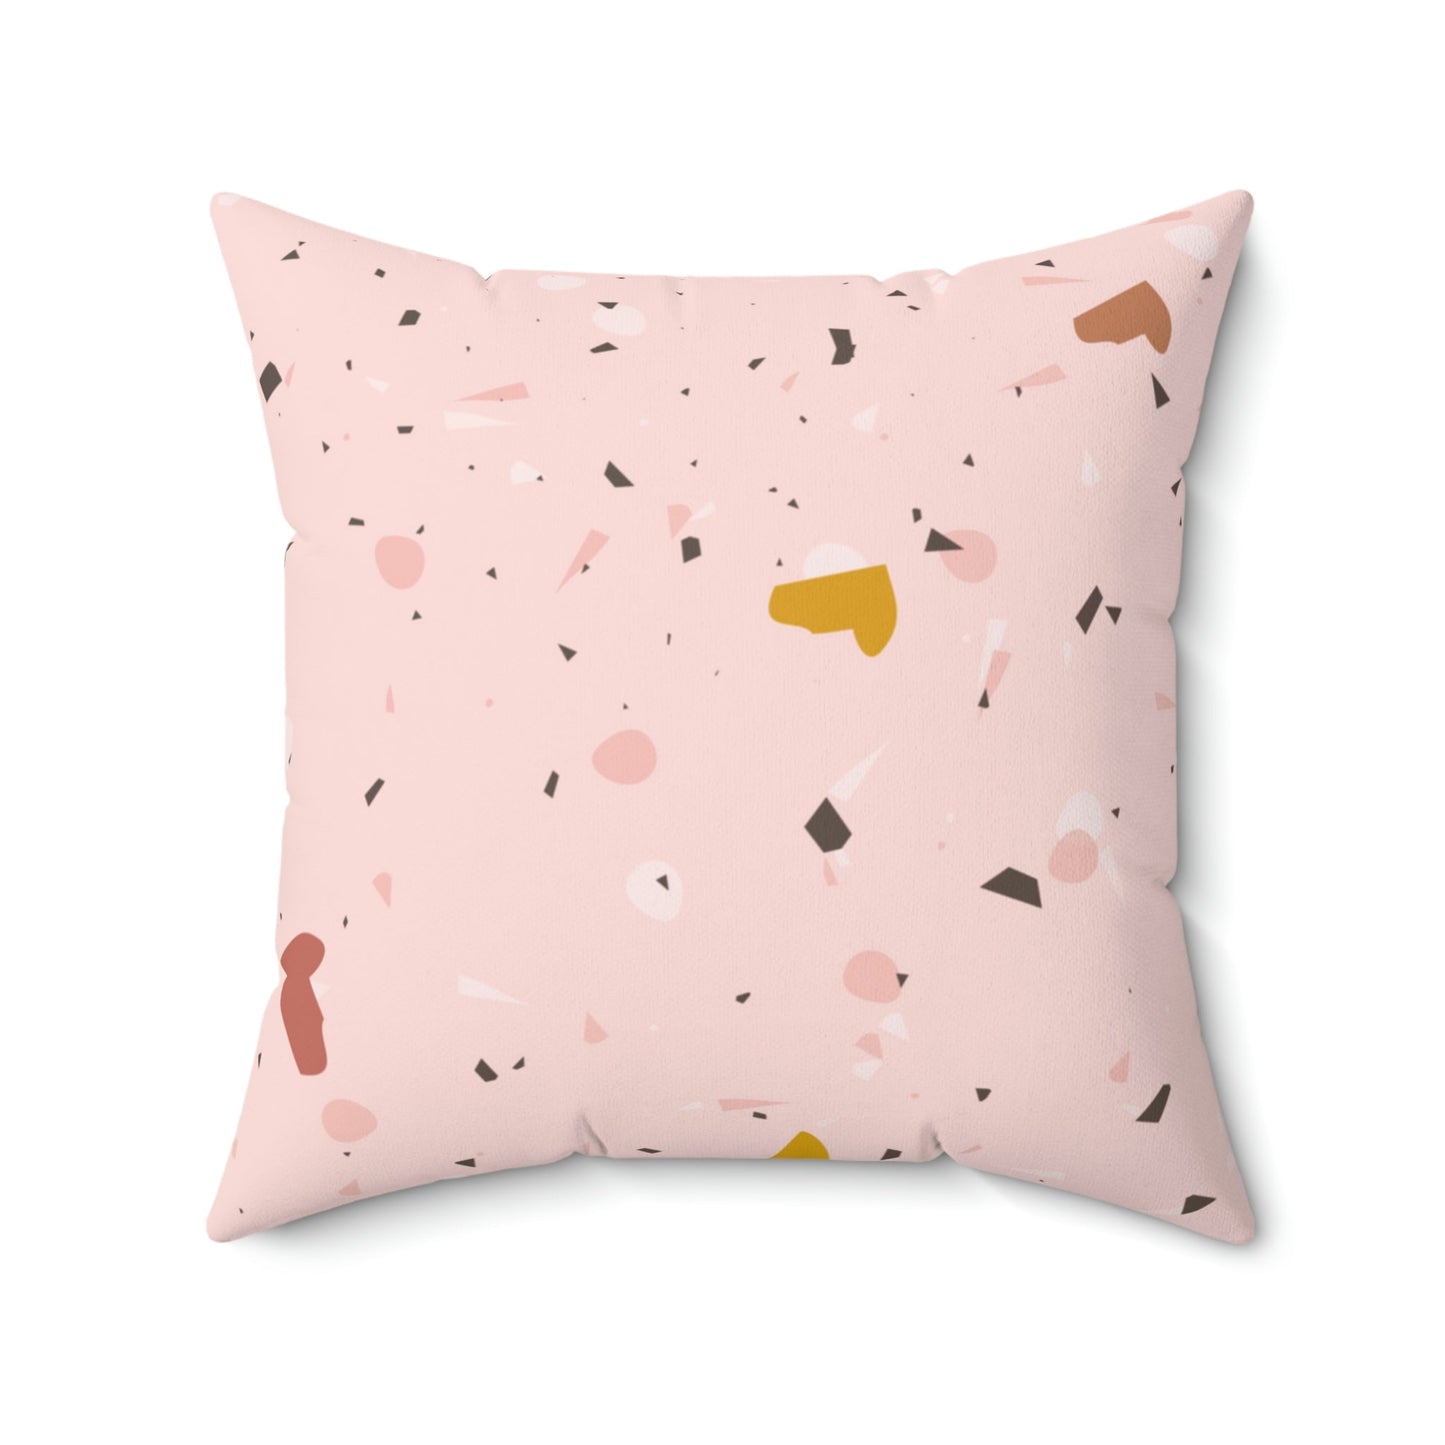 Soft Pink Terrazzo Square Pillow Home Decor Pink Sweetheart